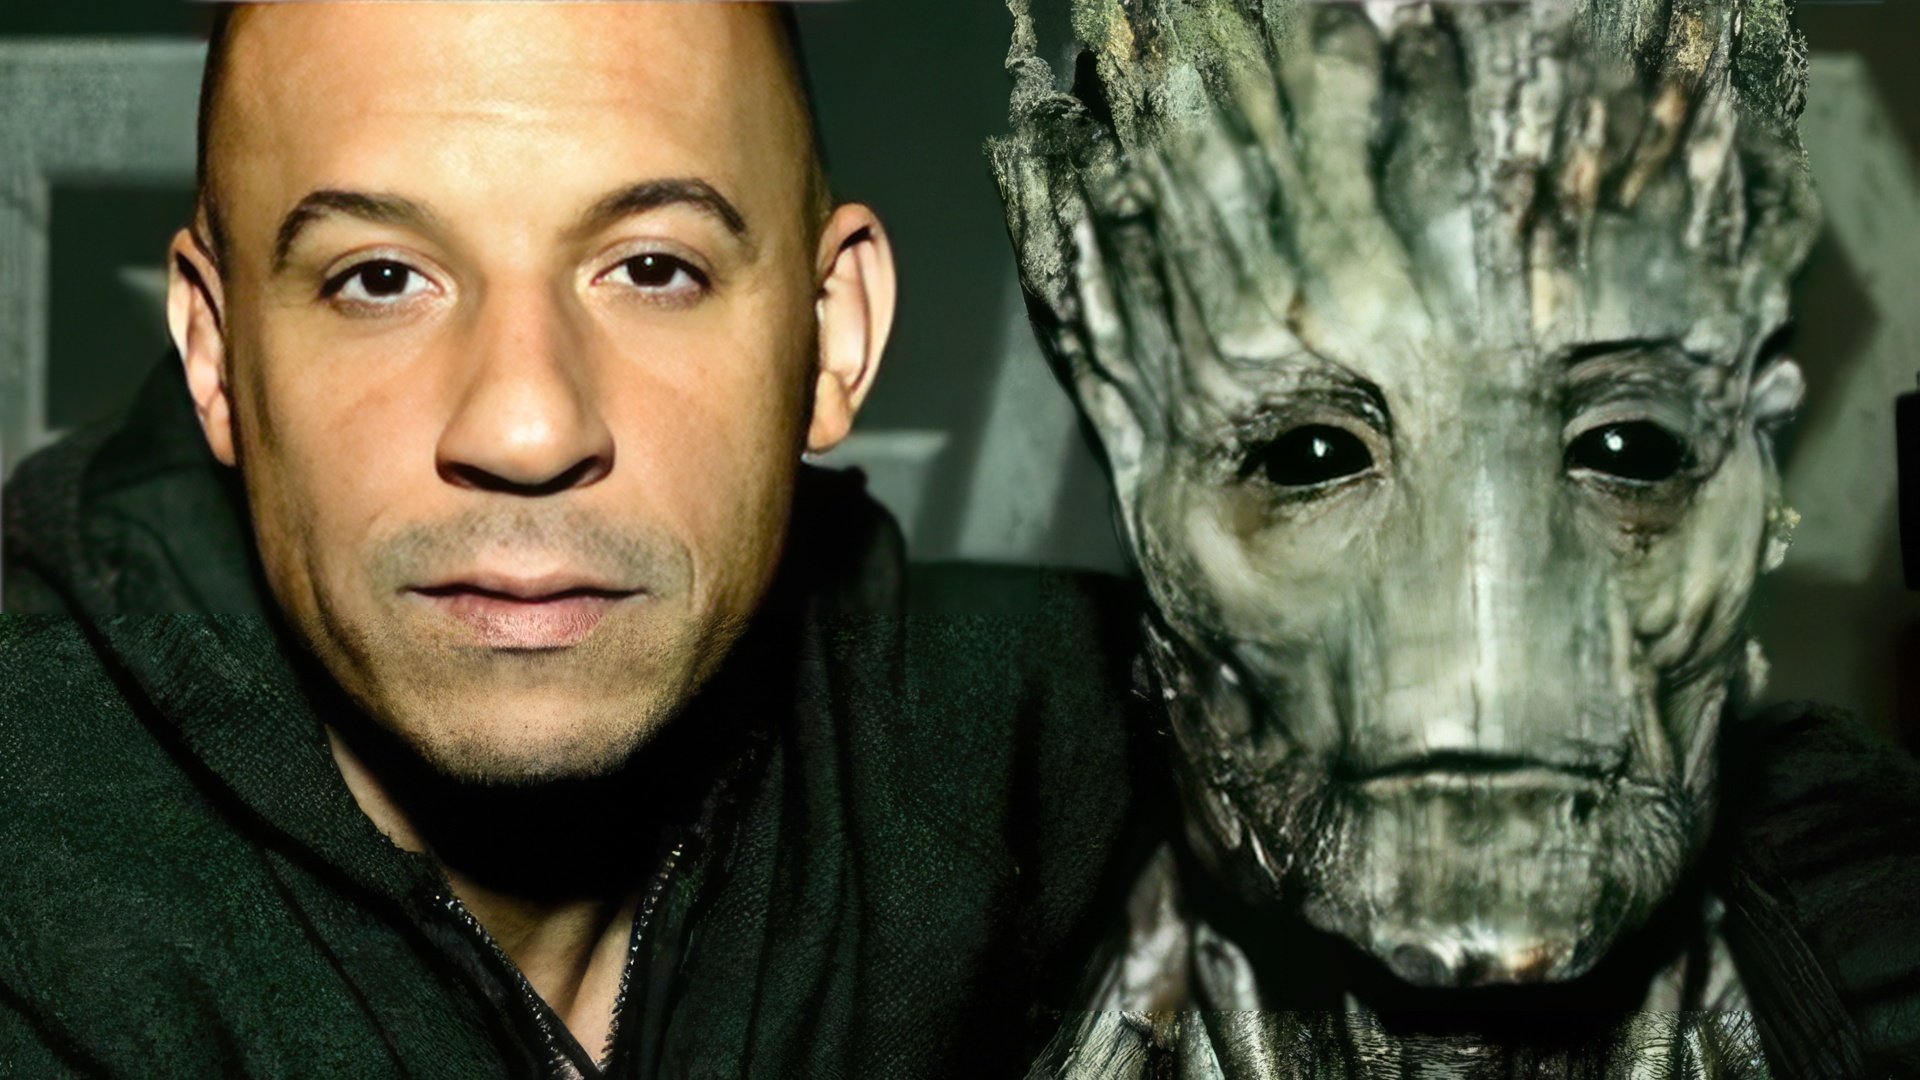 Vin Diesel gave voice and facial expressions to Groot from 'Guardians of the Galaxy'